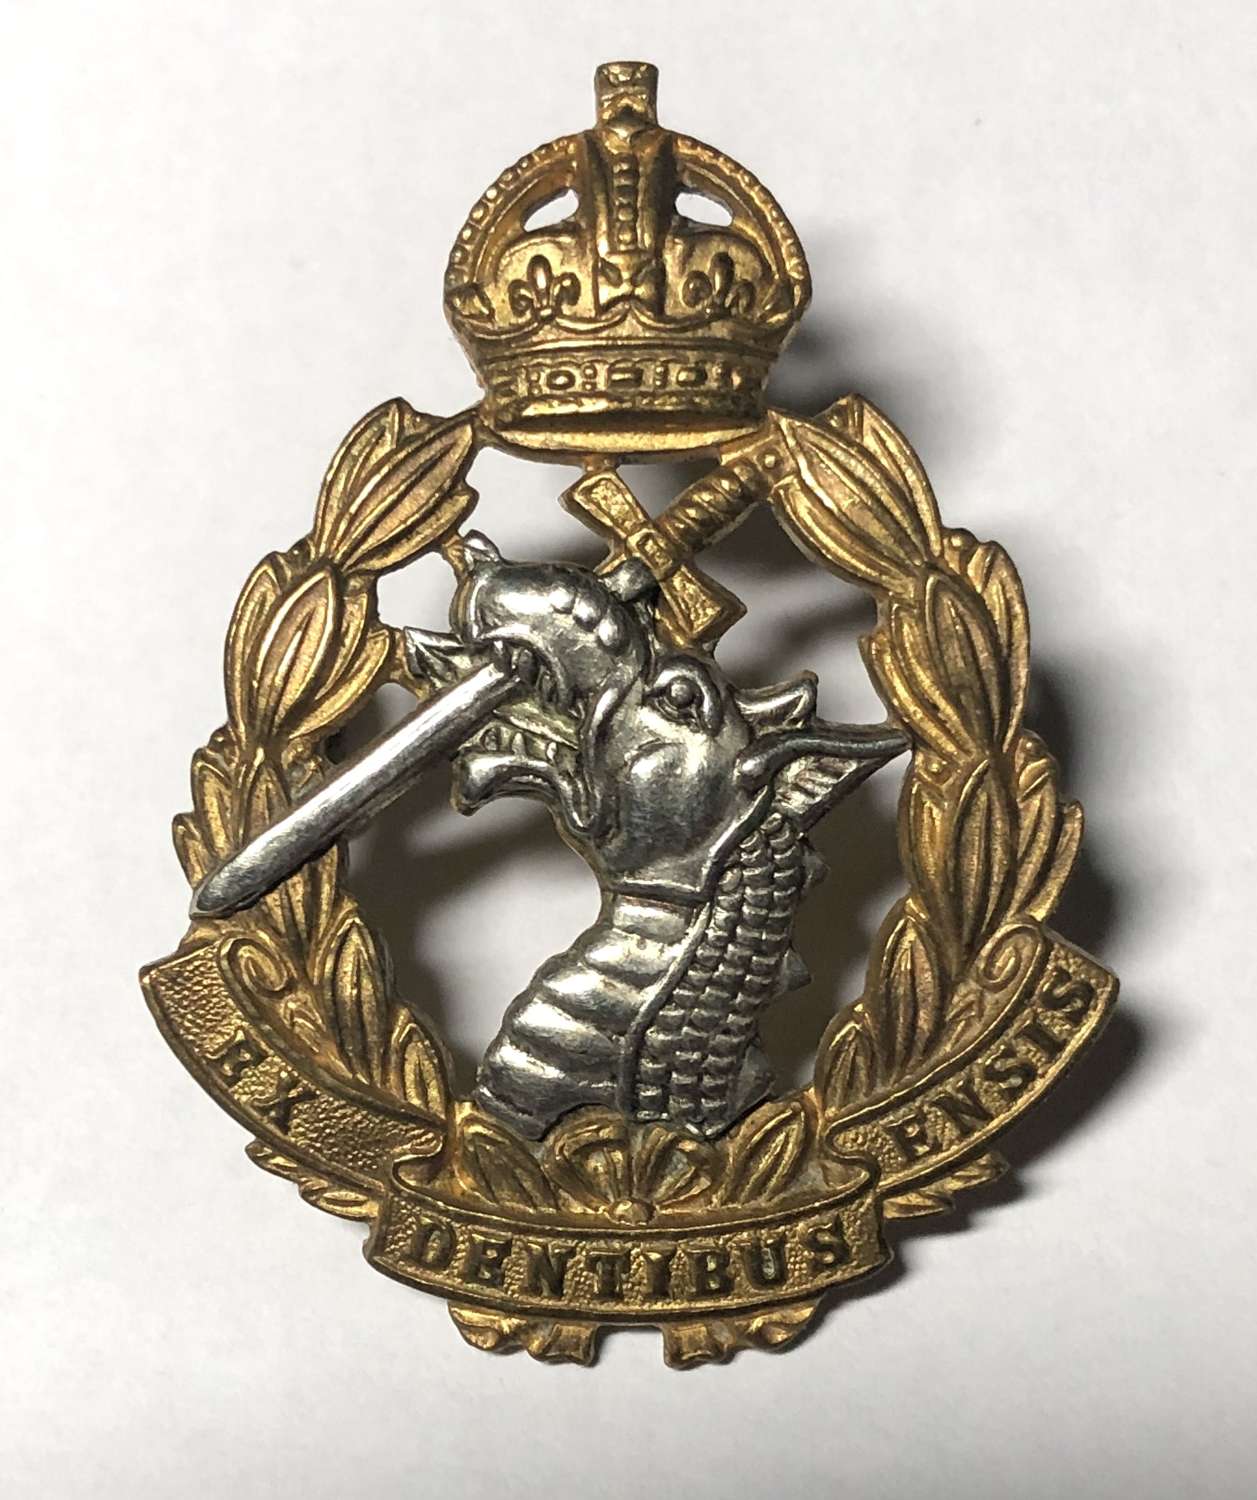 Royal Army Dental Corps Officer's cap badge by Gaunt, London c1946-52